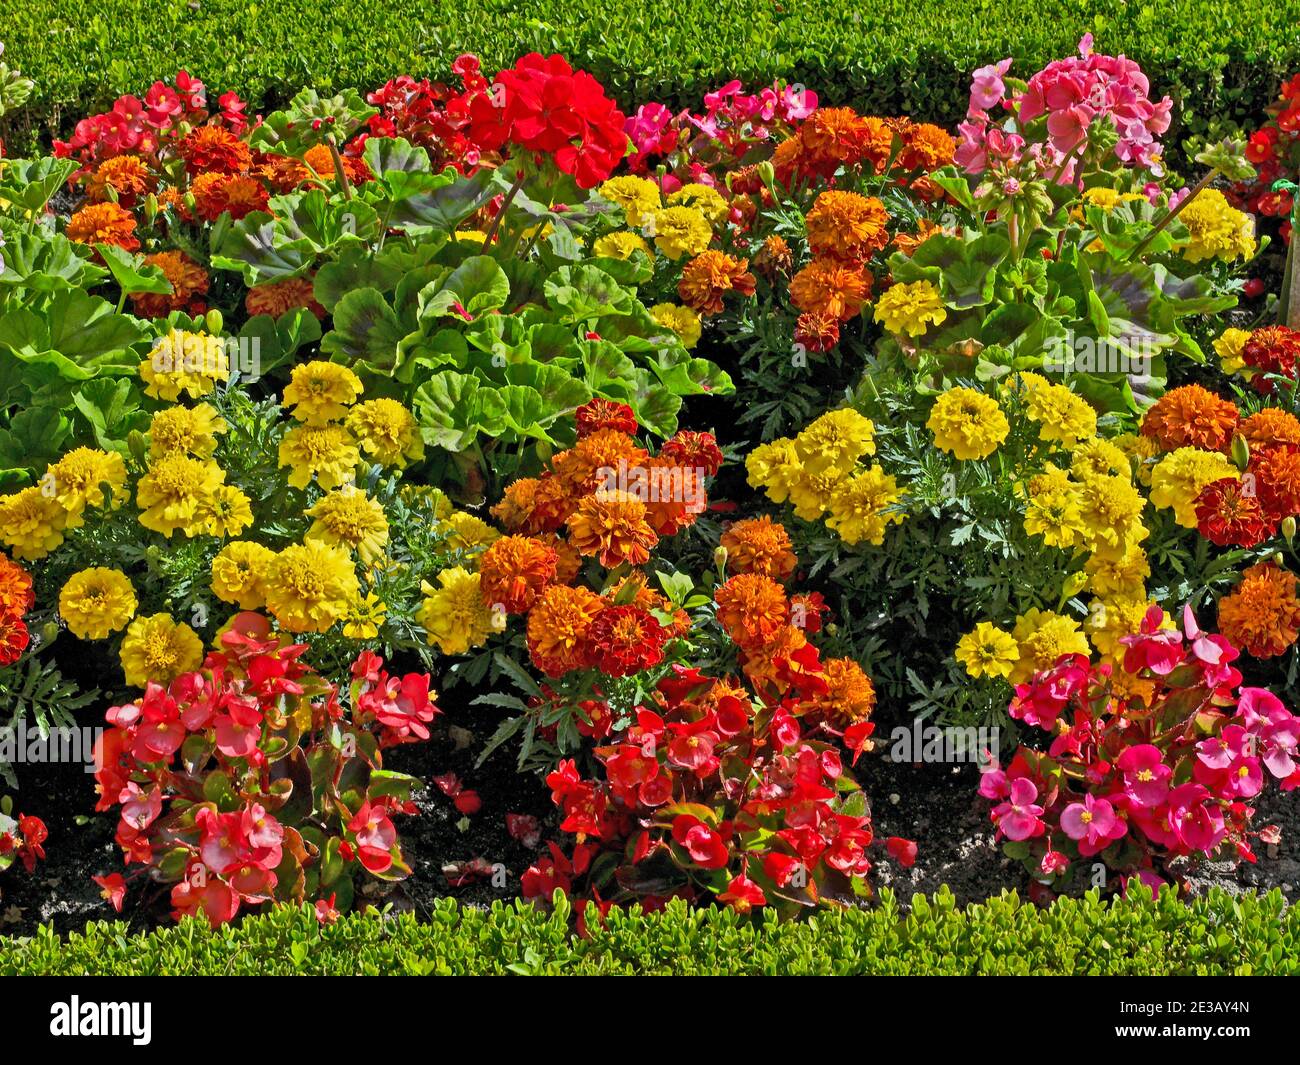 Close up detail of Begonias and French Marigolds in a Flower Garden Stock Photo